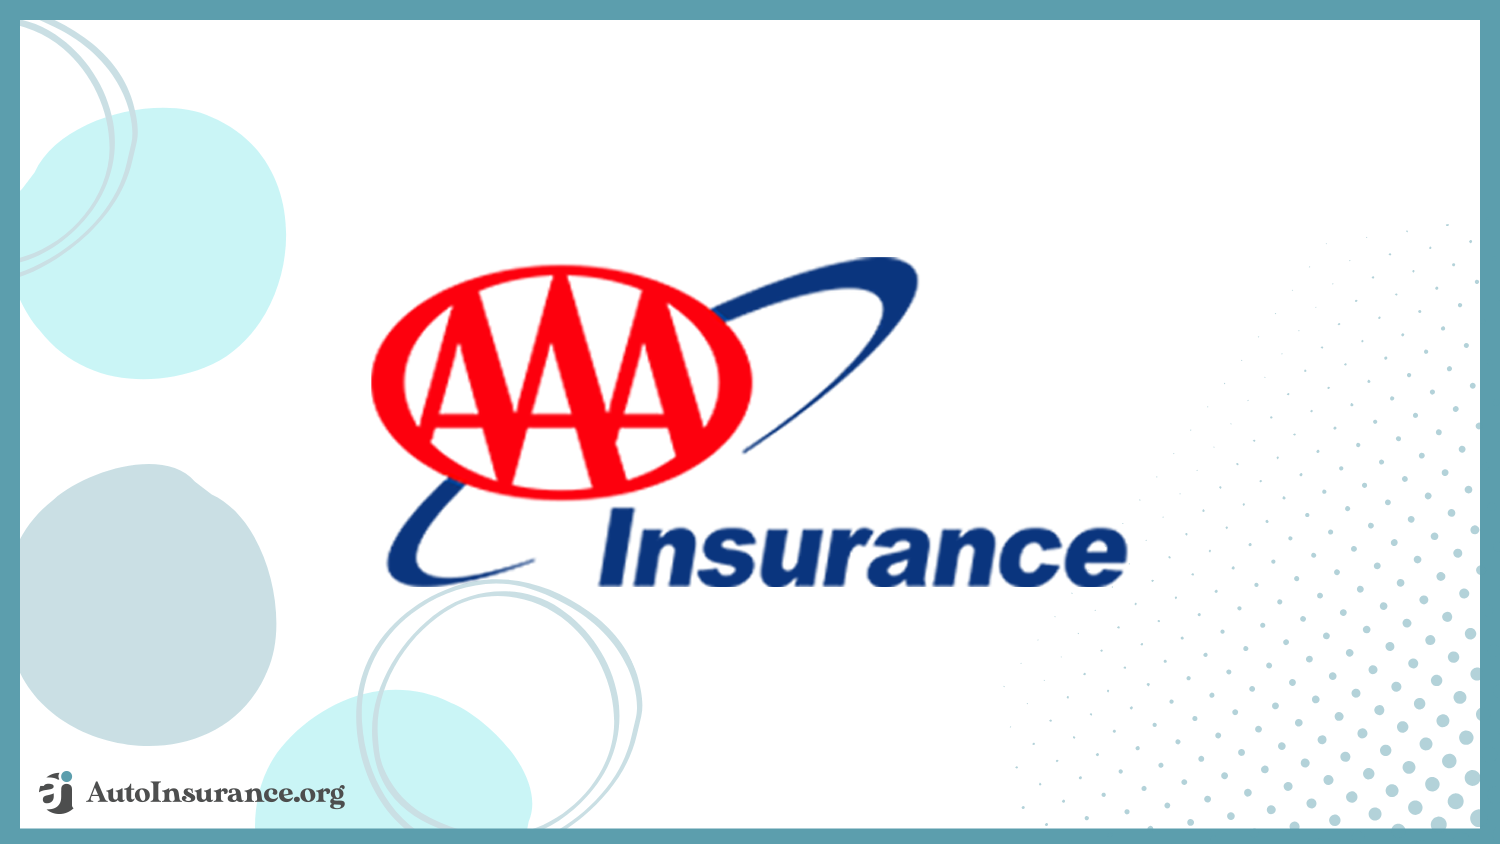 AAA: Best Auto Insurance for Turbo Cars